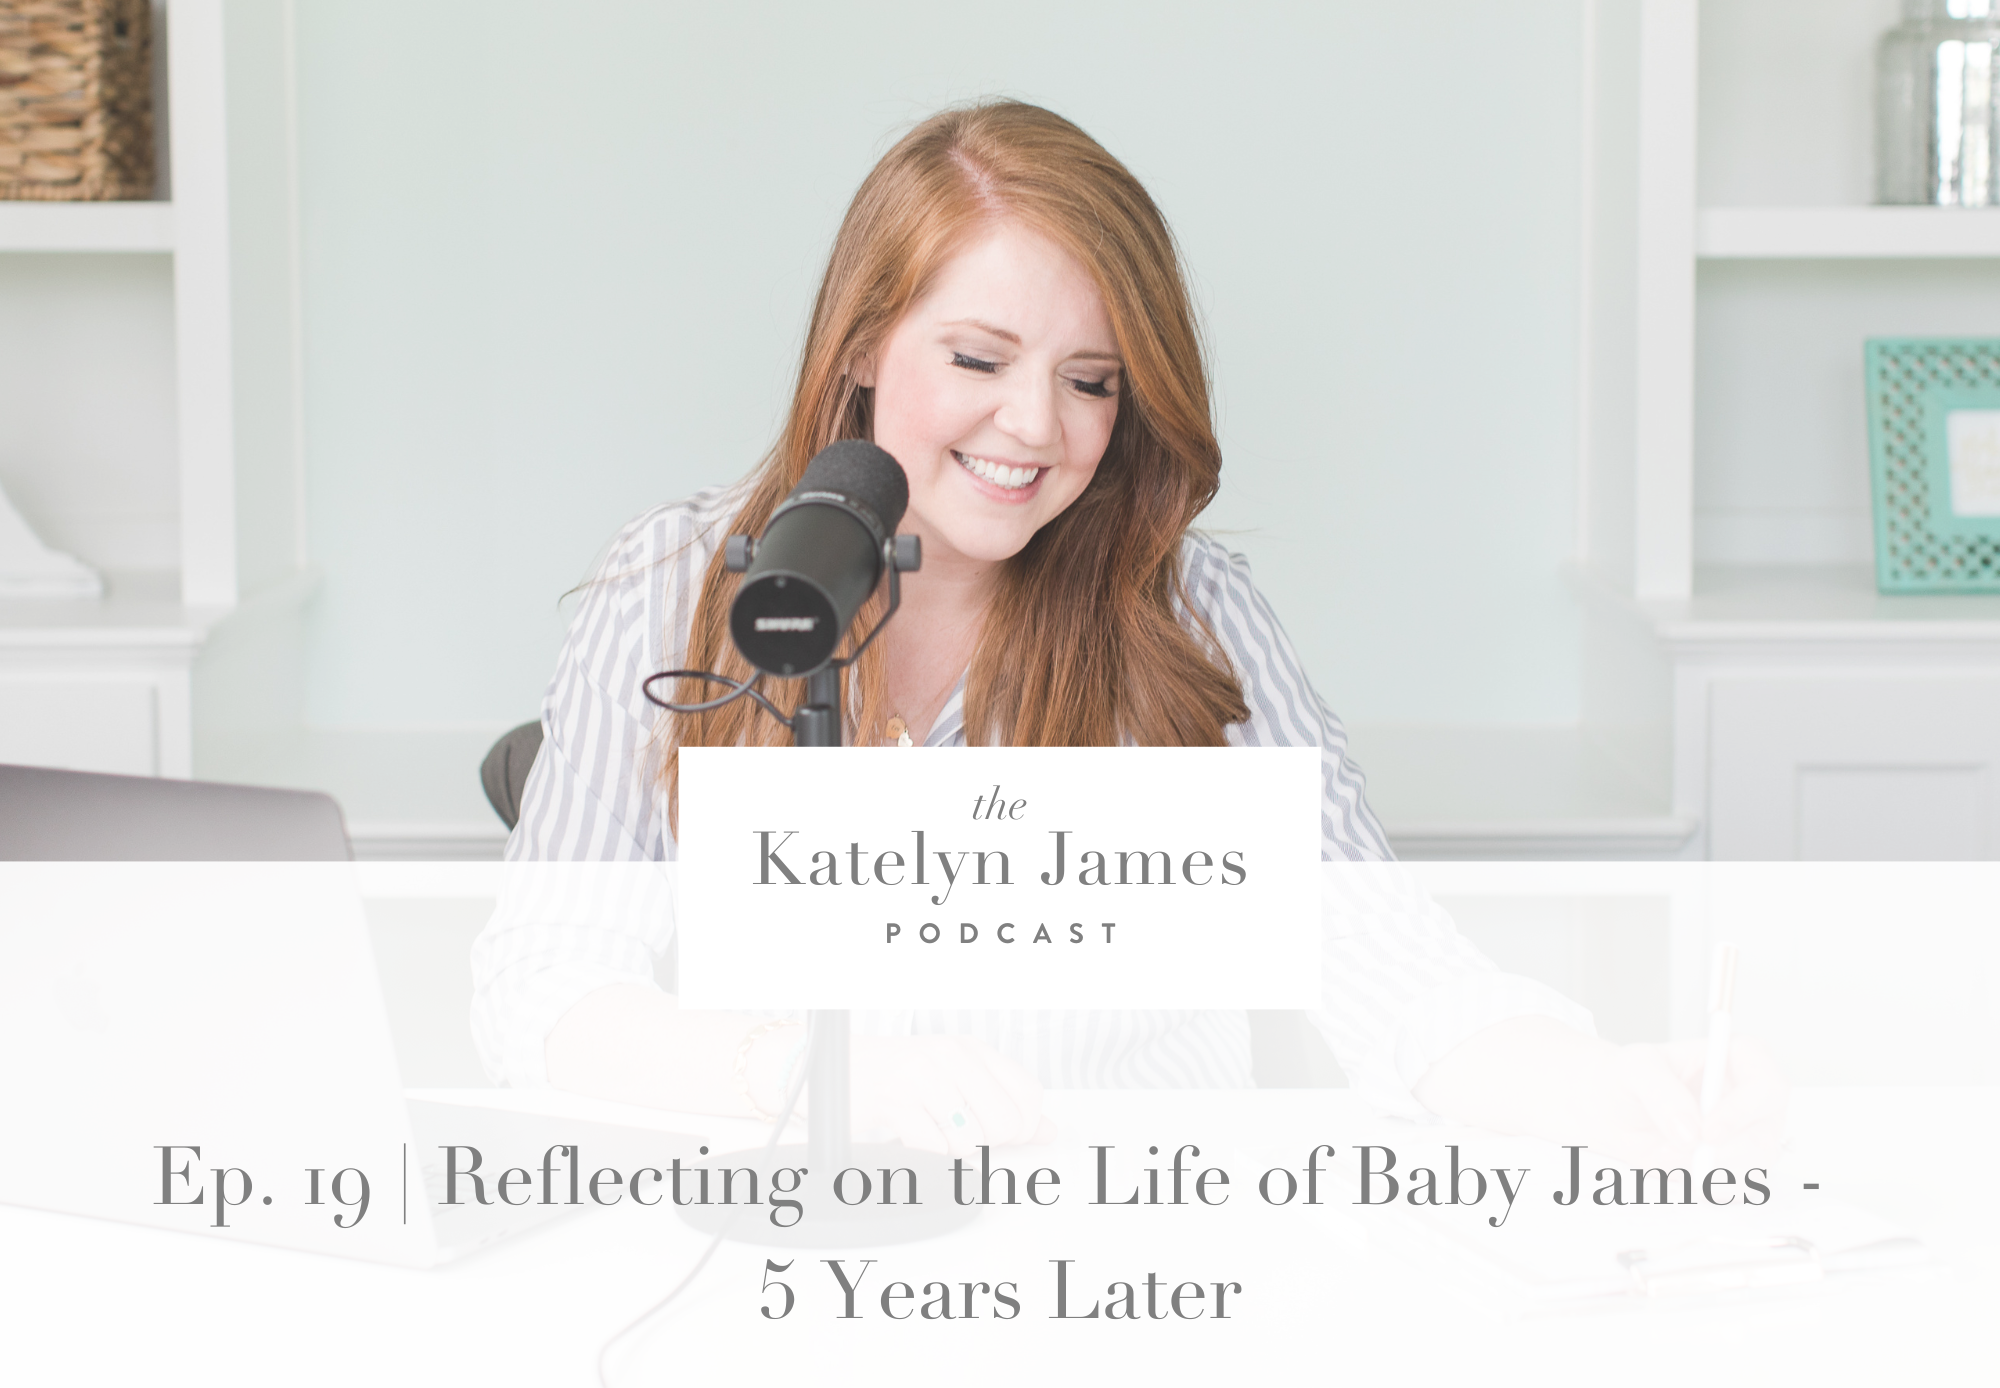 Reflecting on the Life of Baby James - 5 Years Later